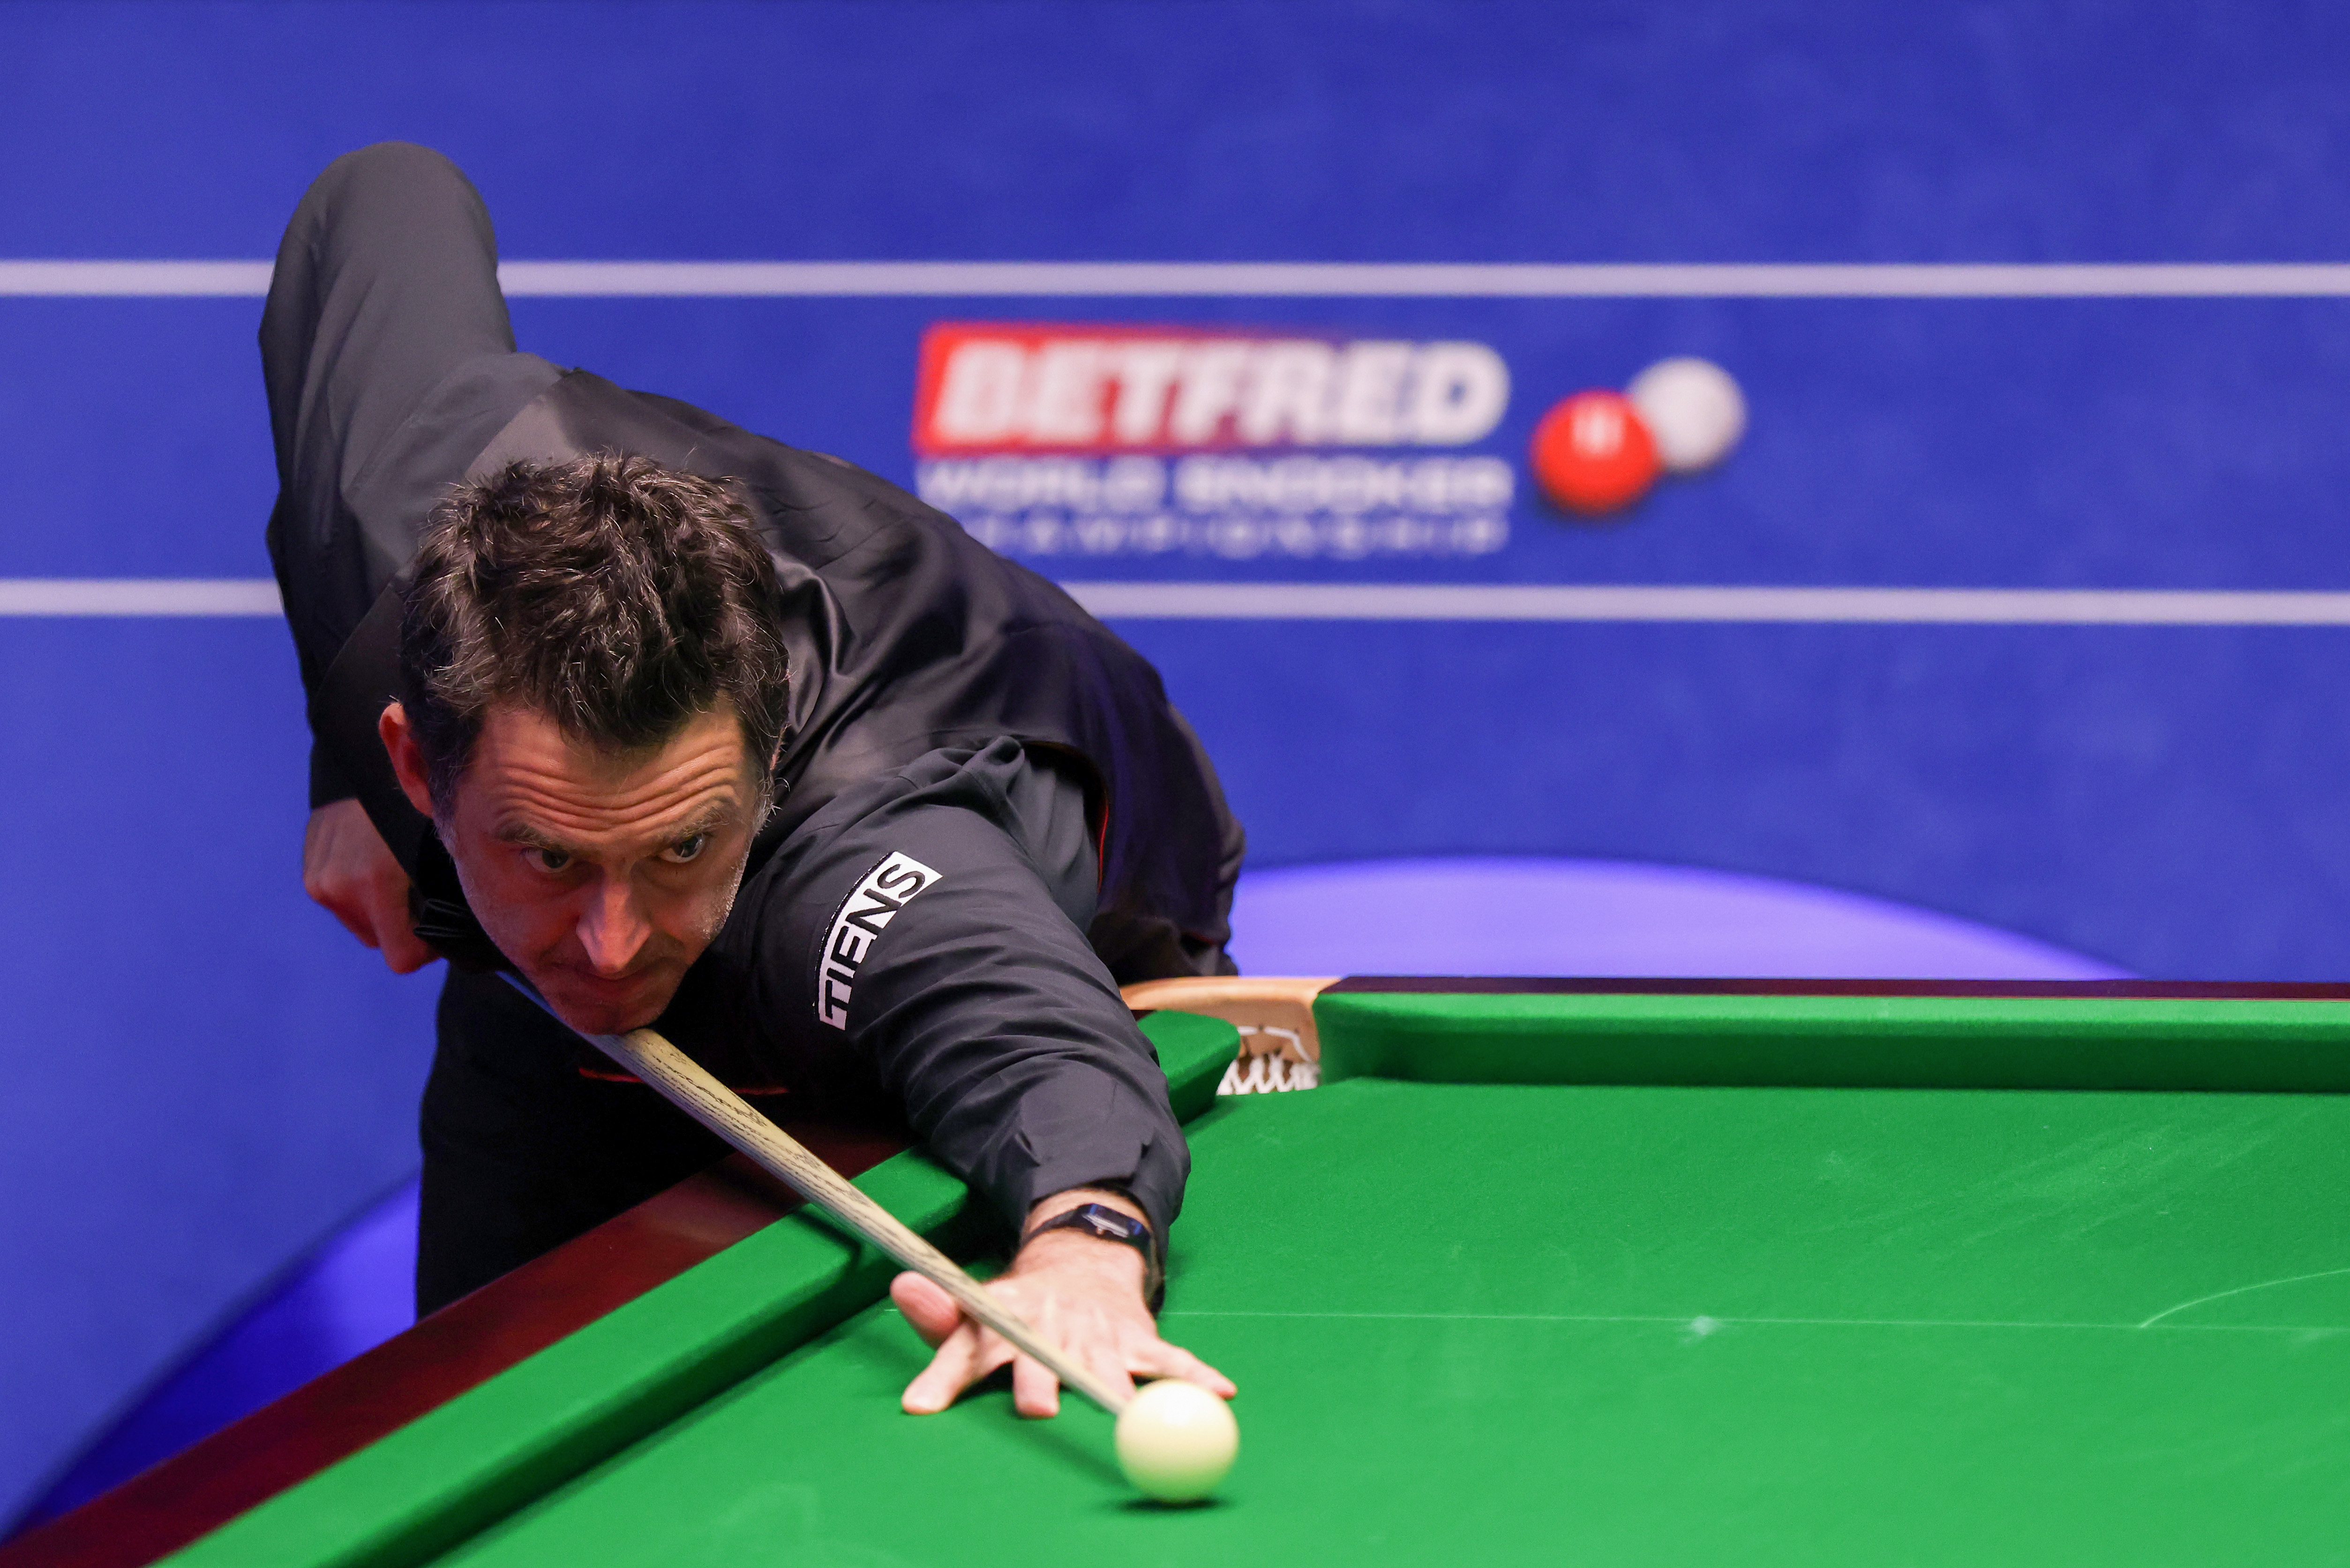 How to watch Masters snooker 2022 on TV channel, live stream and highlights